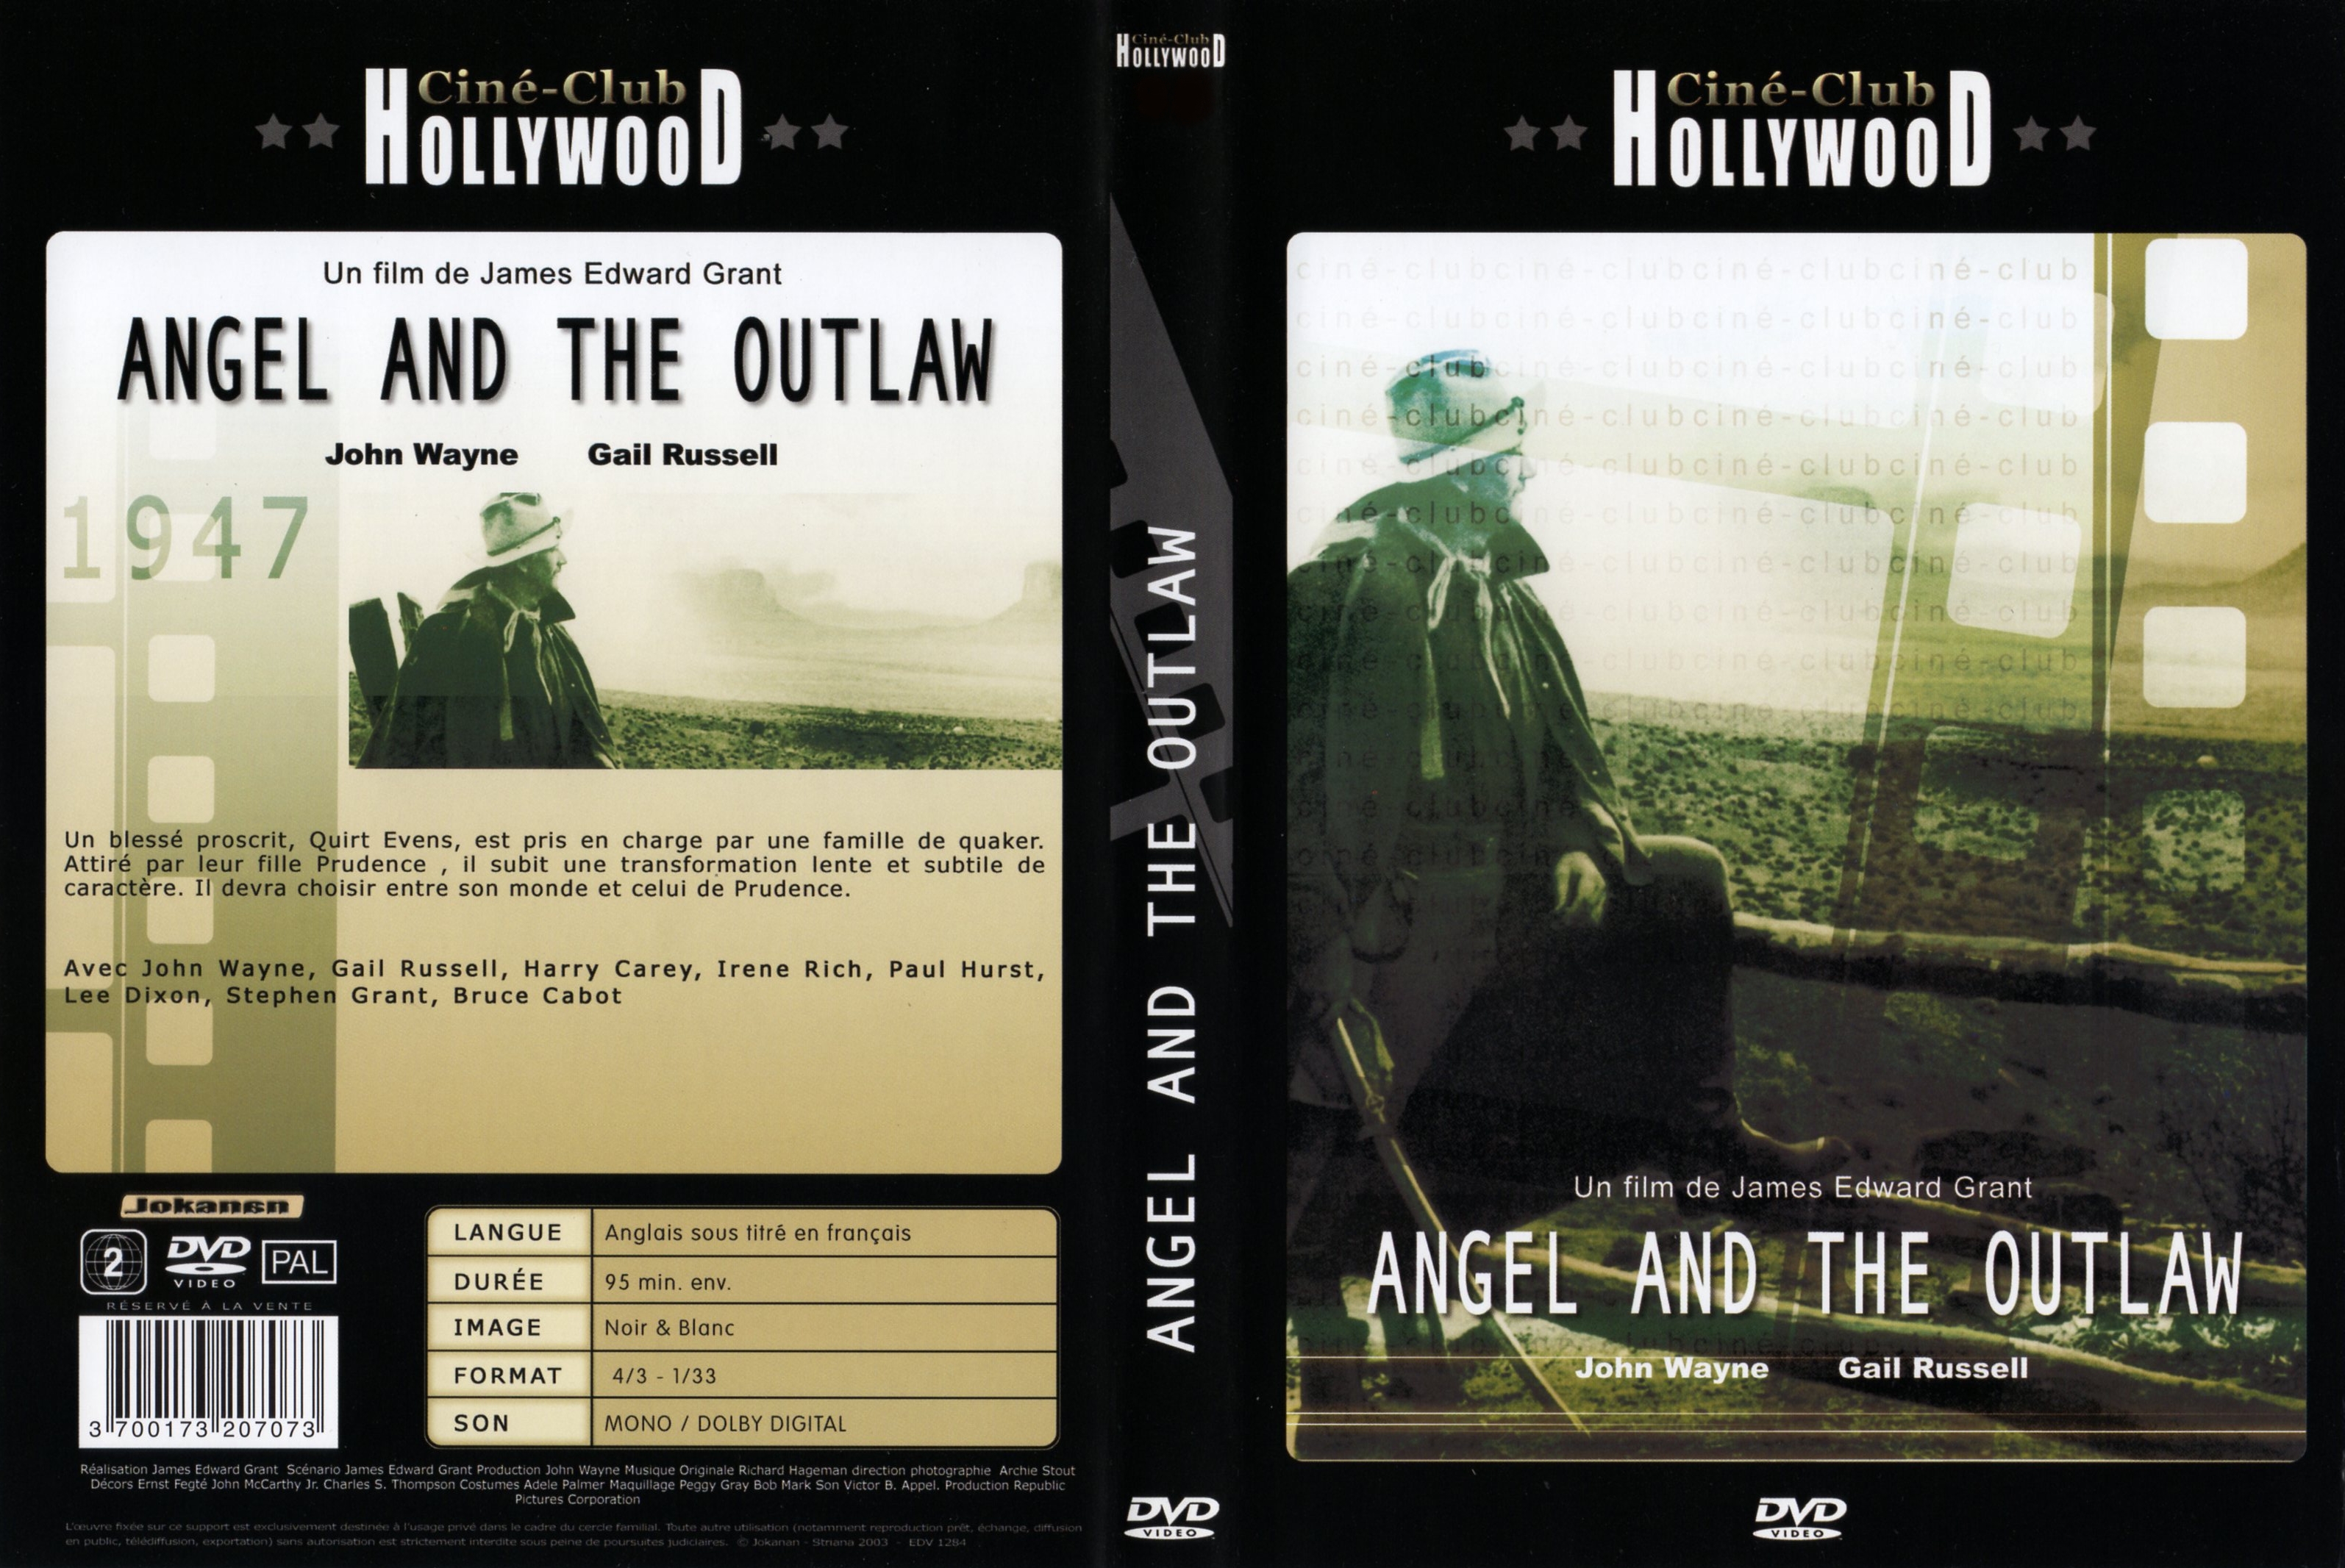 Jaquette DVD Angel and the outlaw